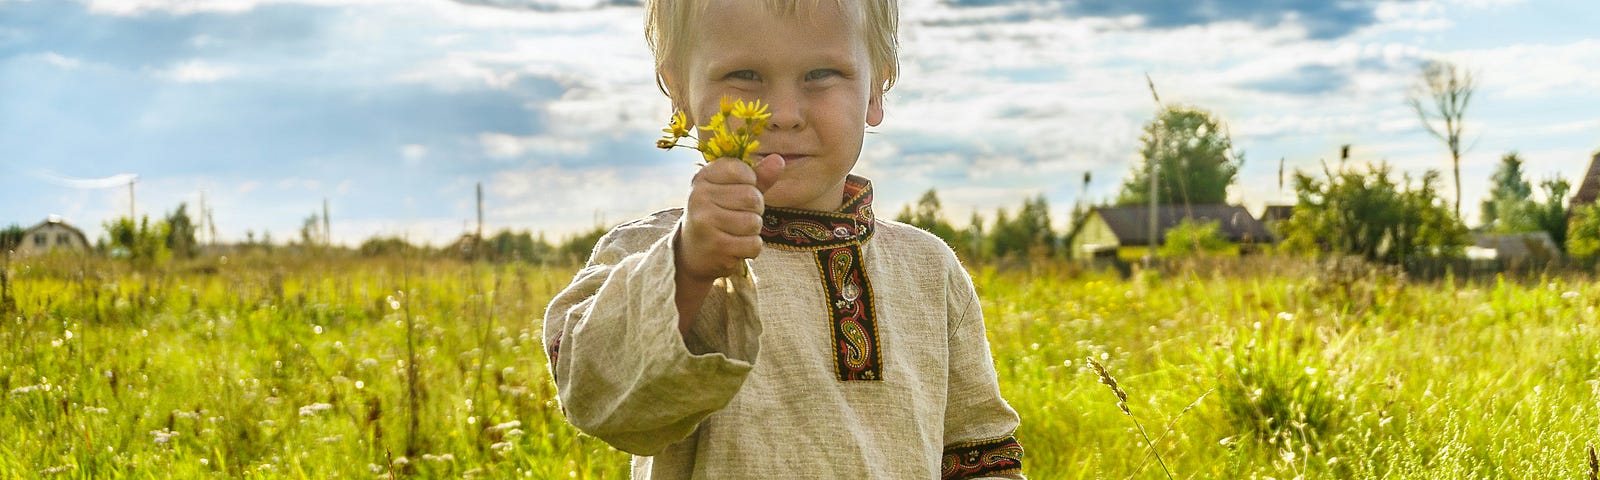 young boy with flowers, in the middle of yellow meadow